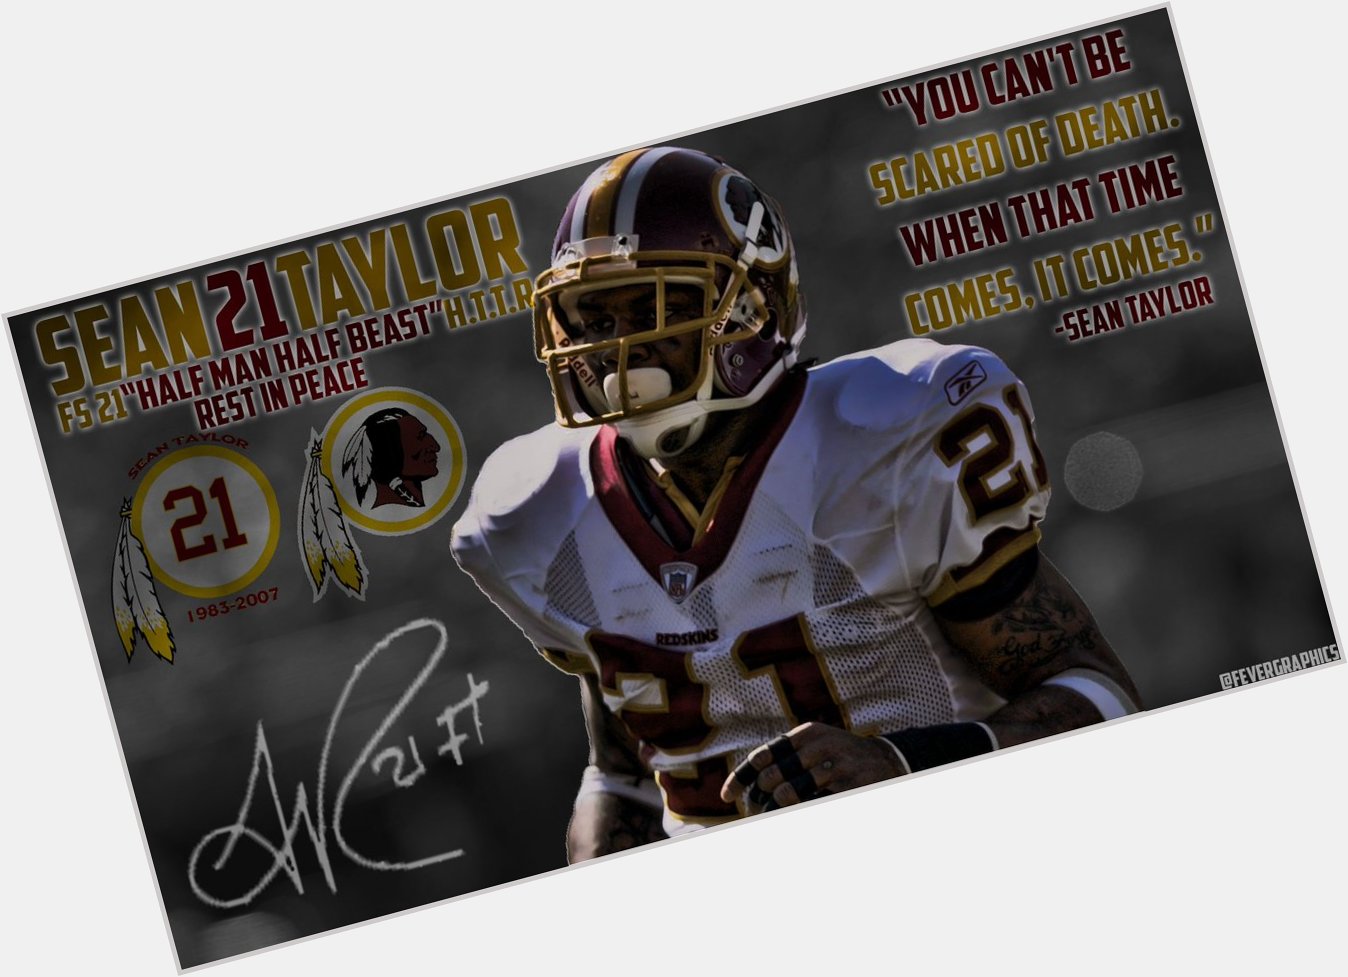 Happy 34th birthday in the great blue sky Sean Taylor! 